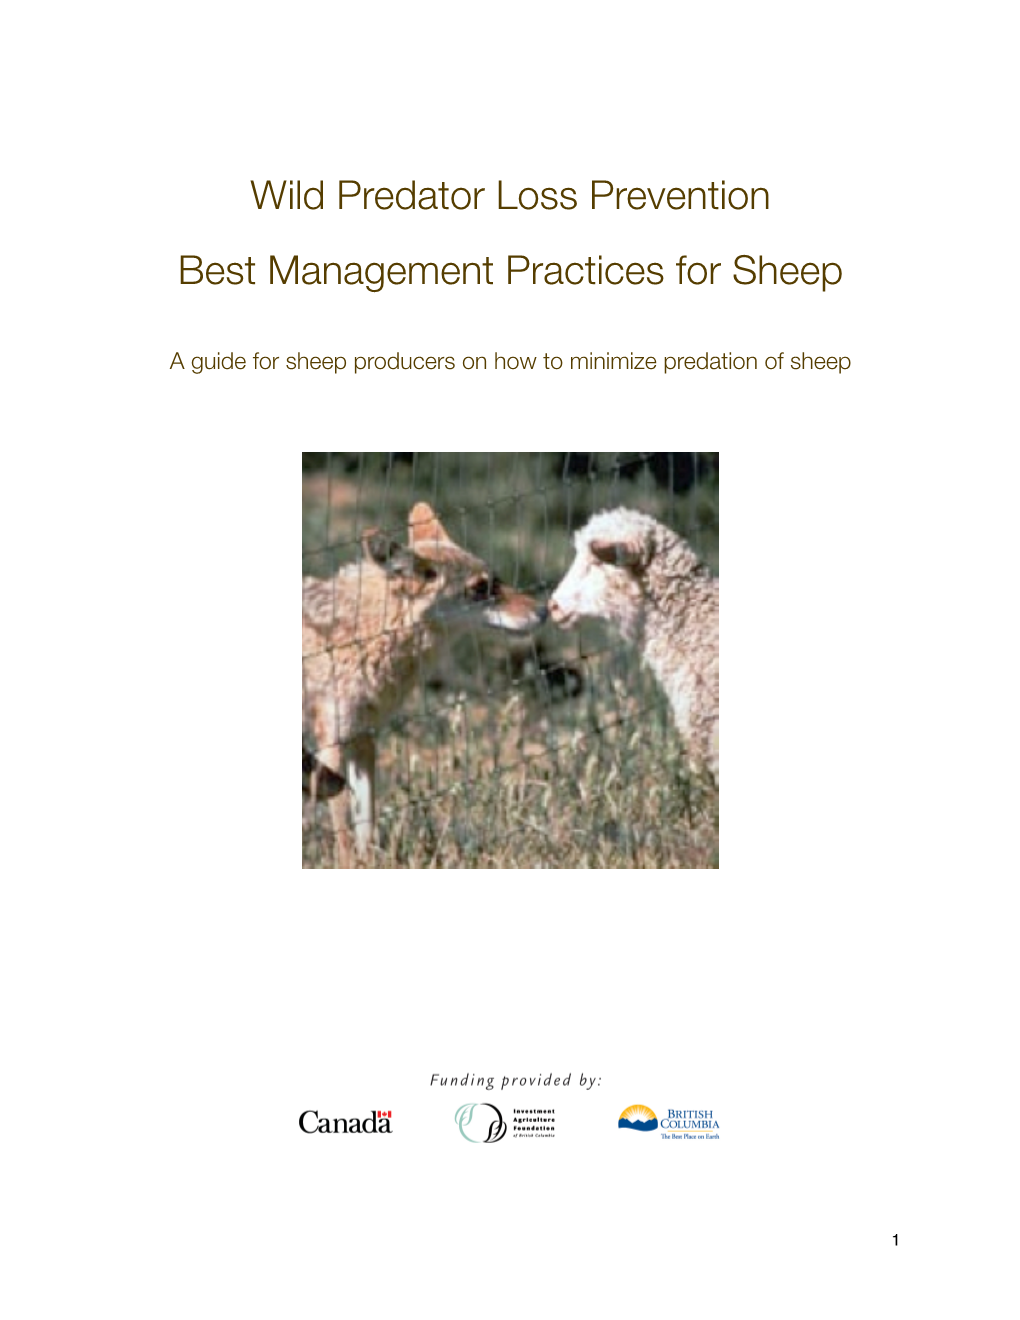 Wild Predator Loss Prevention Best Management Practices for Sheep